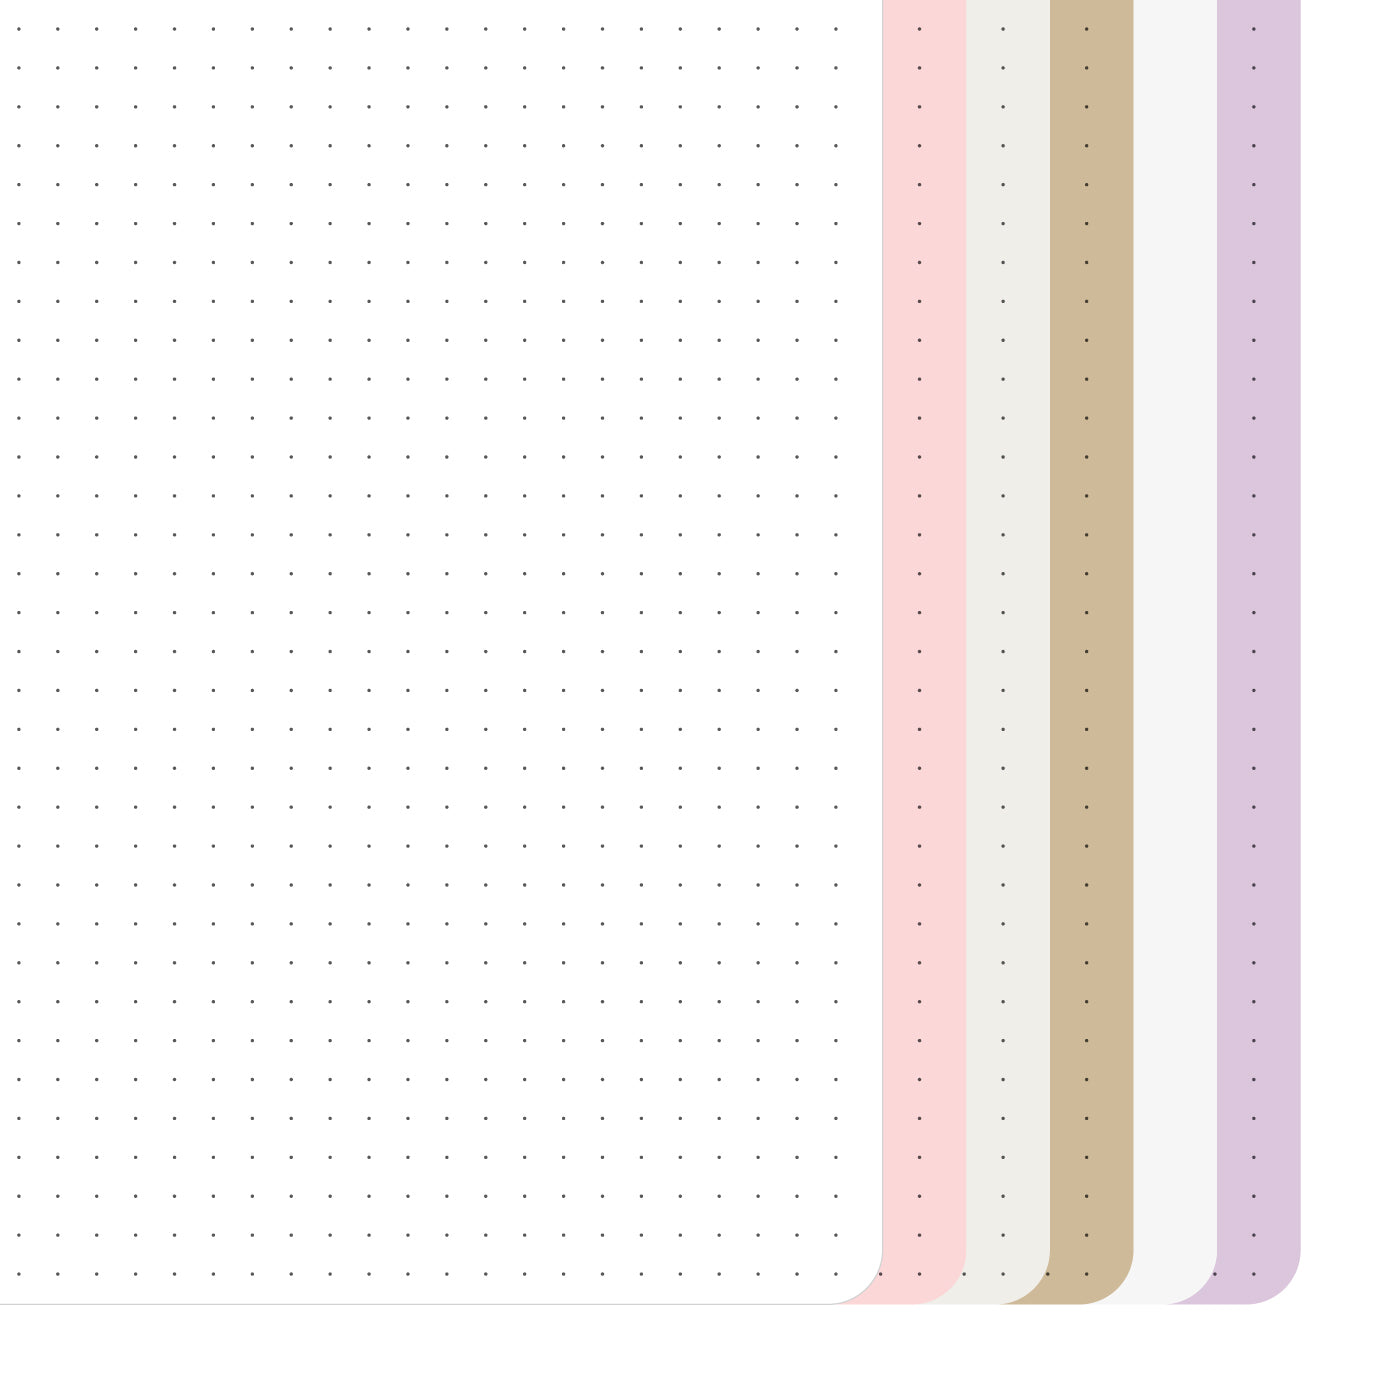 Preorder Magic in the Making with Amy Tangerine A5 Dot Grid Notebook with Mixed Pages - Archer and Olive